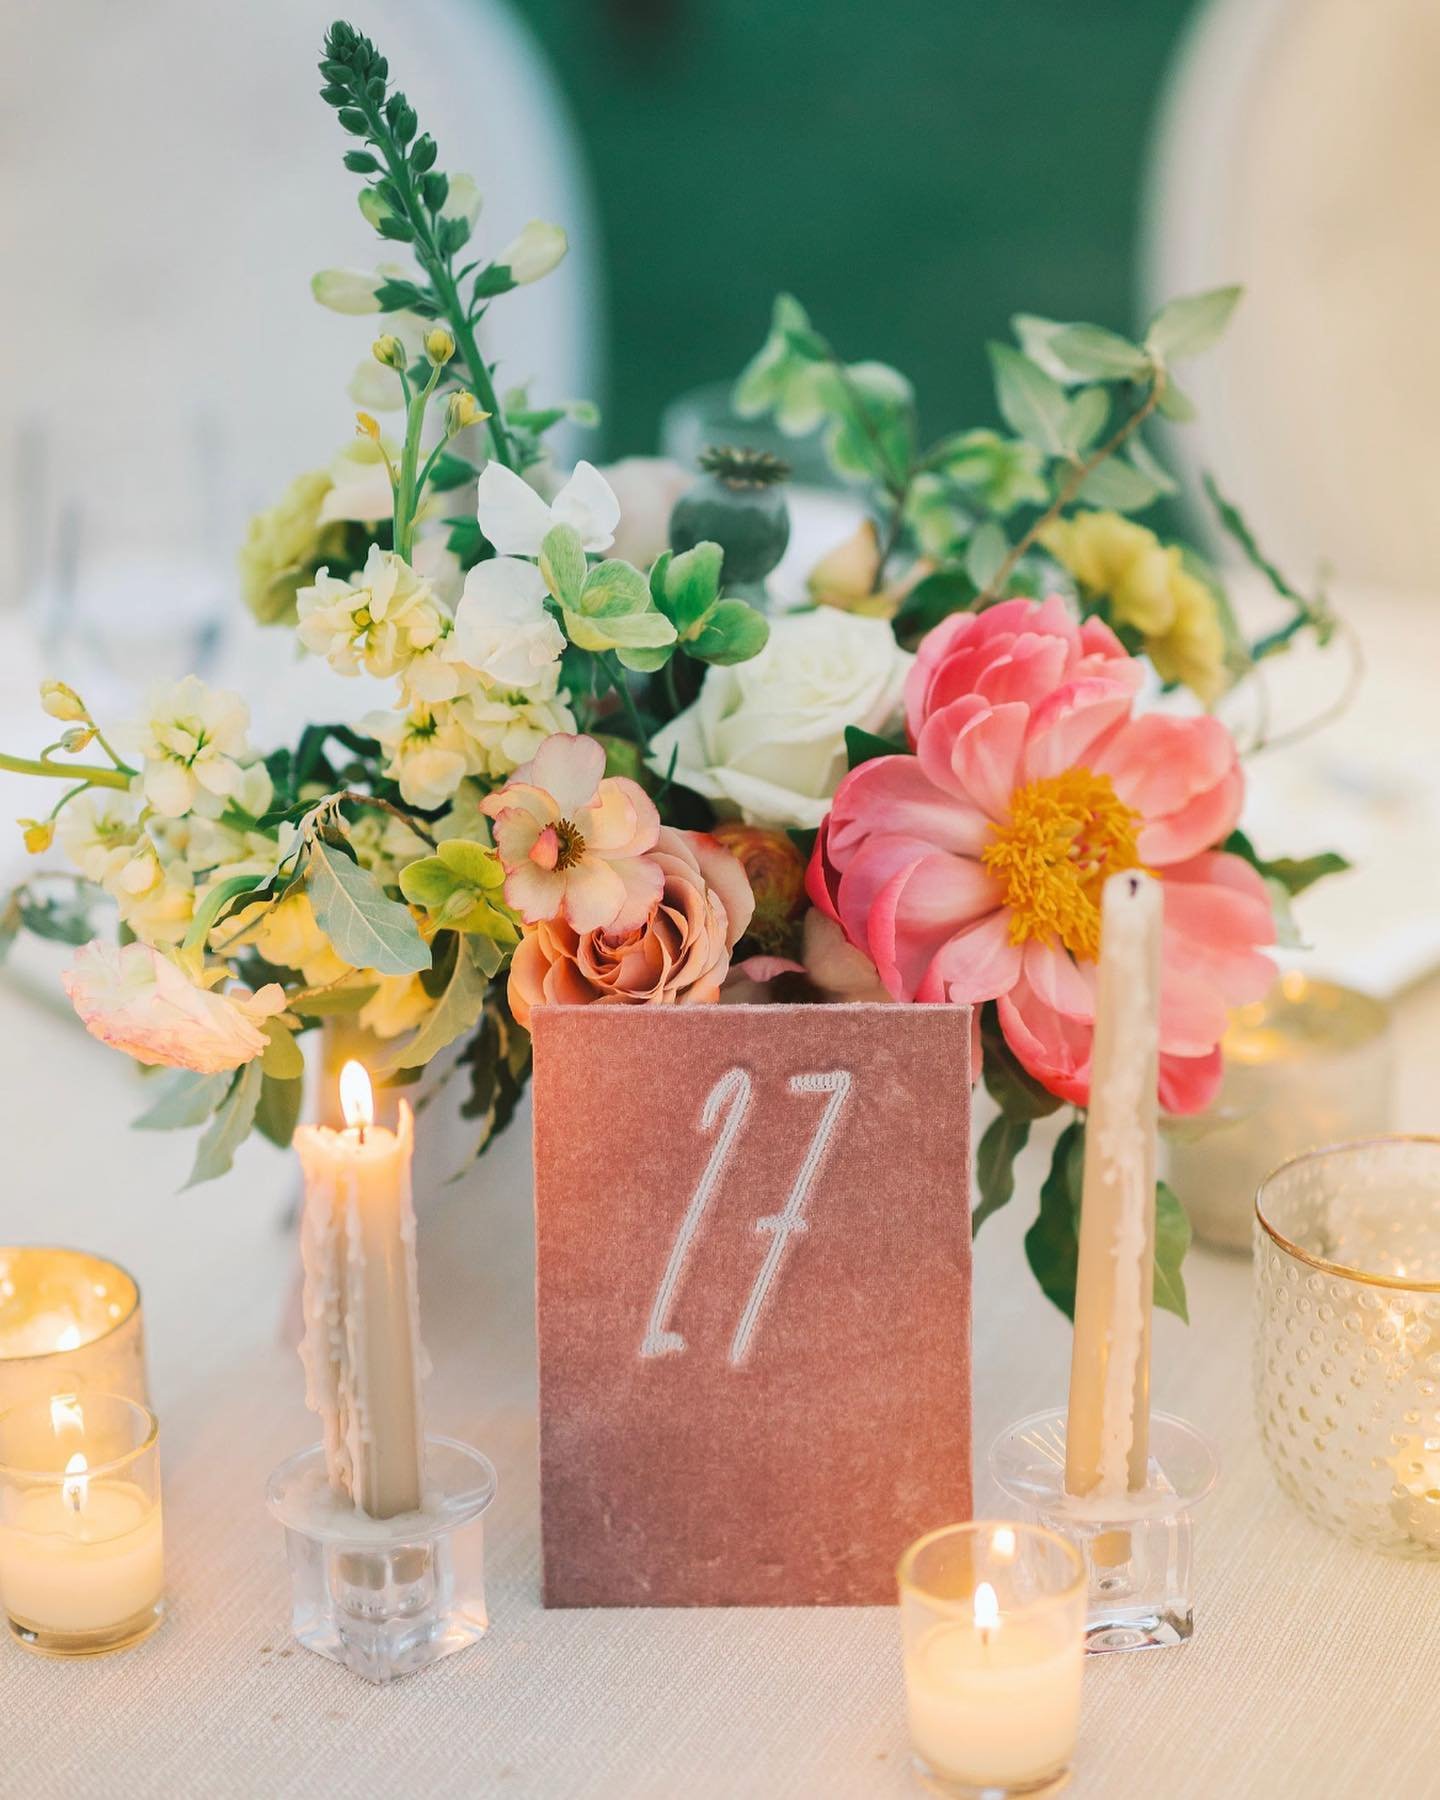 Textures, color stories, patterns vs solids - the little but incredibly impactful visual decisions that make a wedding FEEL like your clients, and extension of their own personal aesthetic.

With each of my clients, I have them do a little visual hom